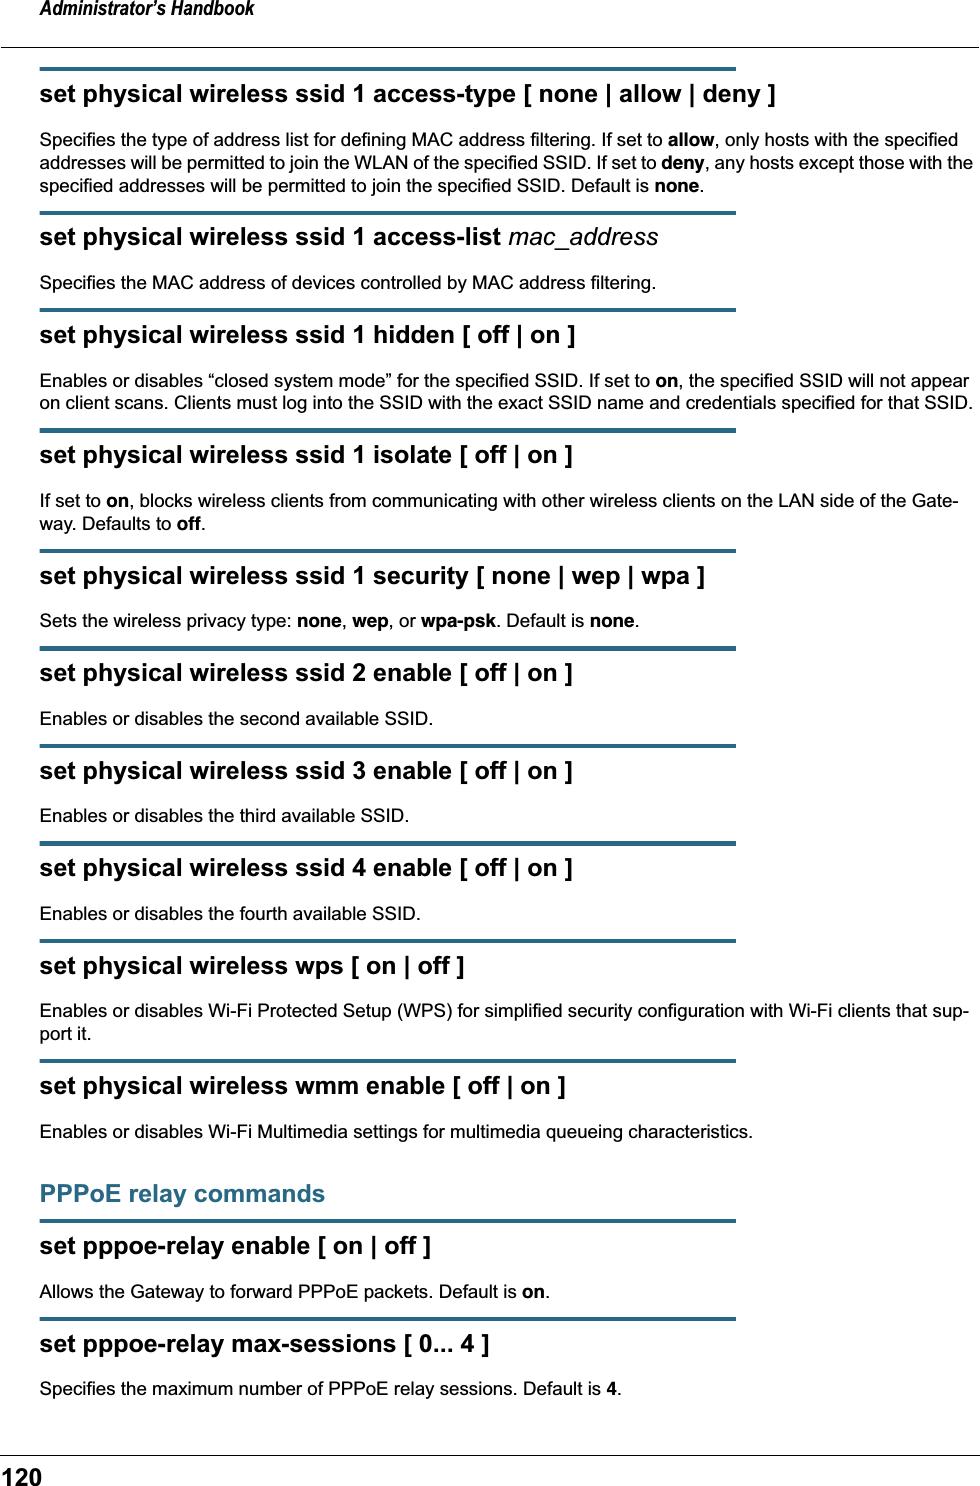 Administrator’s Handbook120set physical wireless ssid 1 access-type [ none | allow | deny ]Specifies the type of address list for defining MAC address filtering. If set to allow, only hosts with the specified addresses will be permitted to join the WLAN of the specified SSID. If set to deny, any hosts except those with the specified addresses will be permitted to join the specified SSID. Default is none.set physical wireless ssid 1 access-list mac_addressSpecifies the MAC address of devices controlled by MAC address filtering.set physical wireless ssid 1 hidden [ off | on ]Enables or disables “closed system mode” for the specified SSID. If set to on, the specified SSID will not appear on client scans. Clients must log into the SSID with the exact SSID name and credentials specified for that SSID.set physical wireless ssid 1 isolate [ off | on ]If set to on, blocks wireless clients from communicating with other wireless clients on the LAN side of the Gate-way. Defaults to off.set physical wireless ssid 1 security [ none | wep | wpa ]Sets the wireless privacy type: none, wep, or wpa-psk. Default is none.set physical wireless ssid 2 enable [ off | on ]Enables or disables the second available SSID.set physical wireless ssid 3 enable [ off | on ]Enables or disables the third available SSID.set physical wireless ssid 4 enable [ off | on ]Enables or disables the fourth available SSID.set physical wireless wps [ on | off ]Enables or disables Wi-Fi Protected Setup (WPS) for simplified security configuration with Wi-Fi clients that sup-port it.set physical wireless wmm enable [ off | on ]Enables or disables Wi-Fi Multimedia settings for multimedia queueing characteristics.PPPoE relay commandsset pppoe-relay enable [ on | off ]Allows the Gateway to forward PPPoE packets. Default is on.set pppoe-relay max-sessions [ 0... 4 ]Specifies the maximum number of PPPoE relay sessions. Default is 4.